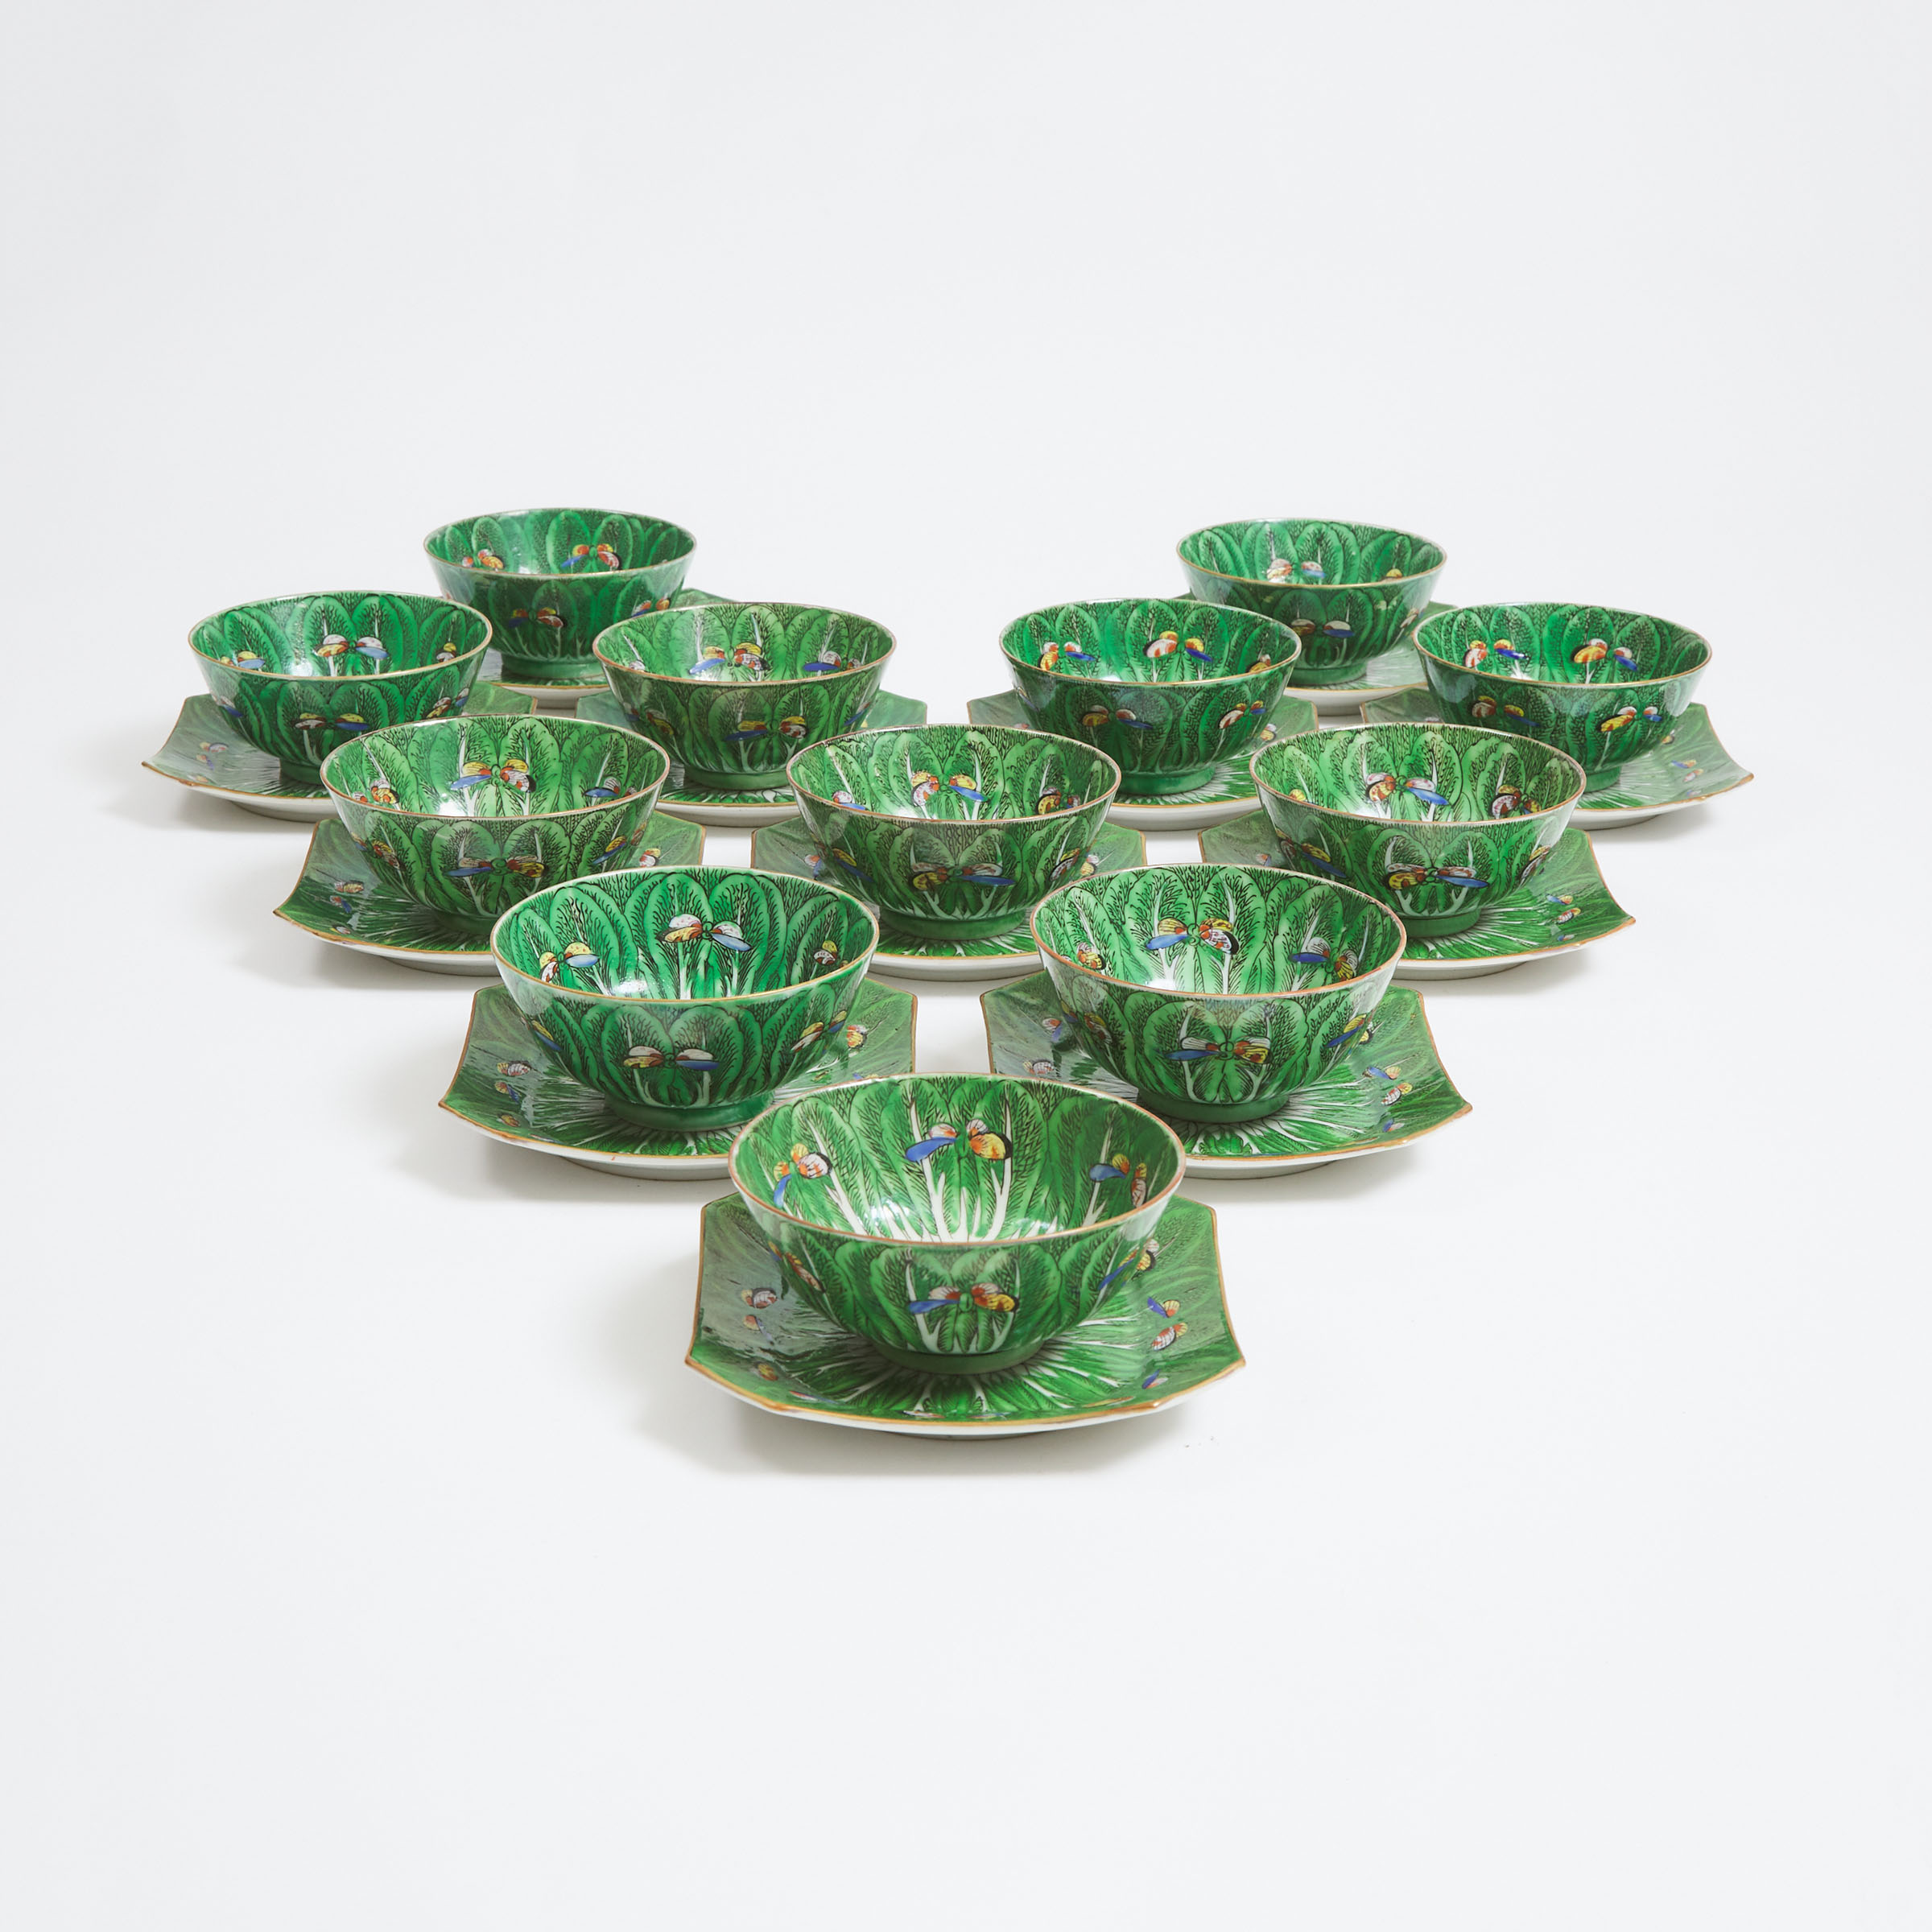 A Set of Twenty-Four Chinese Export 'Cabbage Leaf' Pattern Bowls and Dishes, Early 20th Century